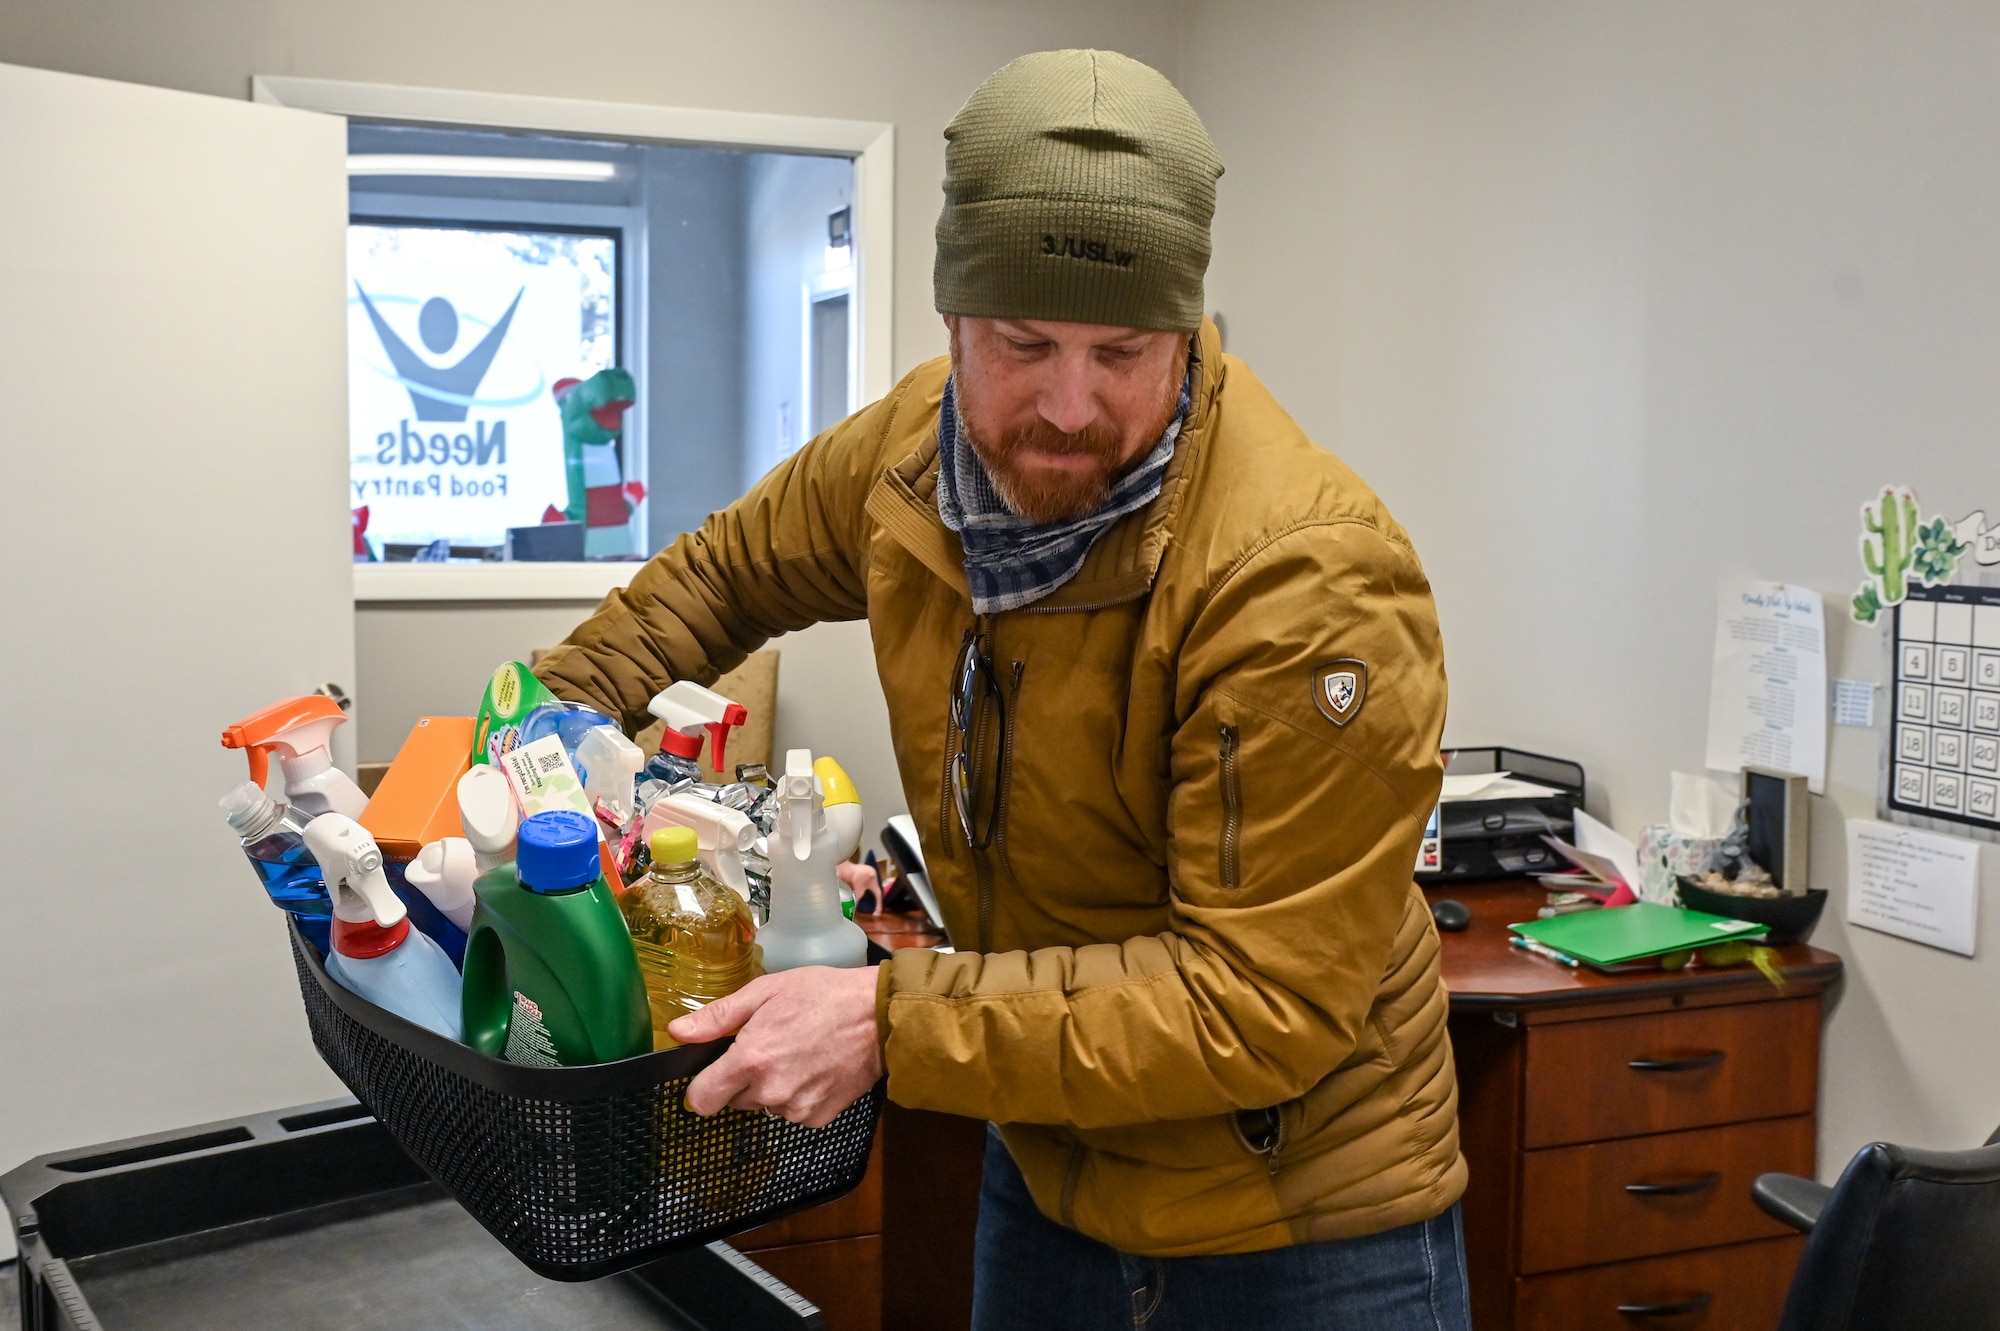 David Cook, 90th Contracting Squadron contracting specialist, drops off presents for local families in need as part of Needs Inc Adopt a Family Program in Cheyenne, Wyoming, Dec 19, 2022. 90 CONS came together for the second year in a row to support two families in need, so they did not have to choose between giving their kids food or celebrating the holiday season. (U.S. Air Force photo by Joseph Coslett Jr.)